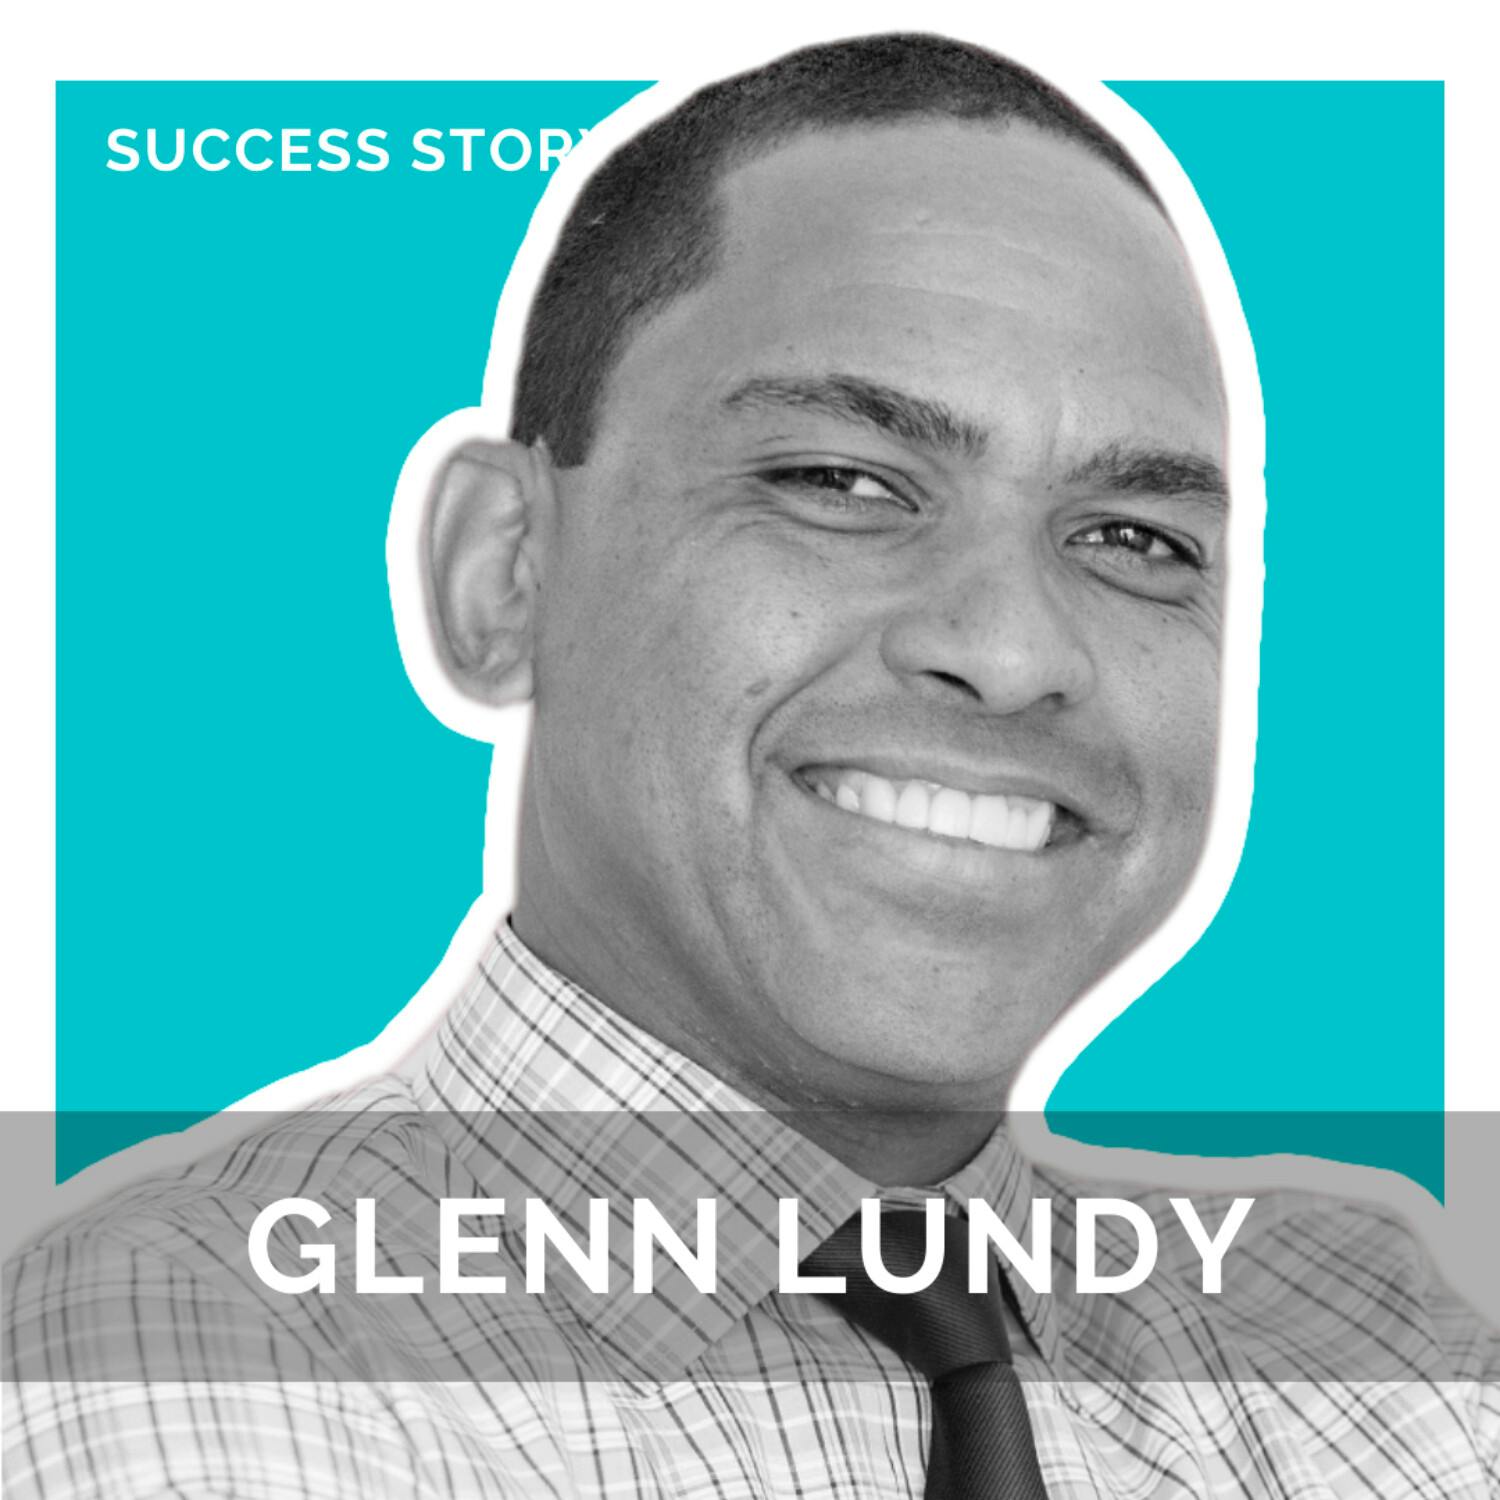 Glenn Lundy, Motivational Speaker & Sales Expert | How to Rise & Grind and Lead With Purpose